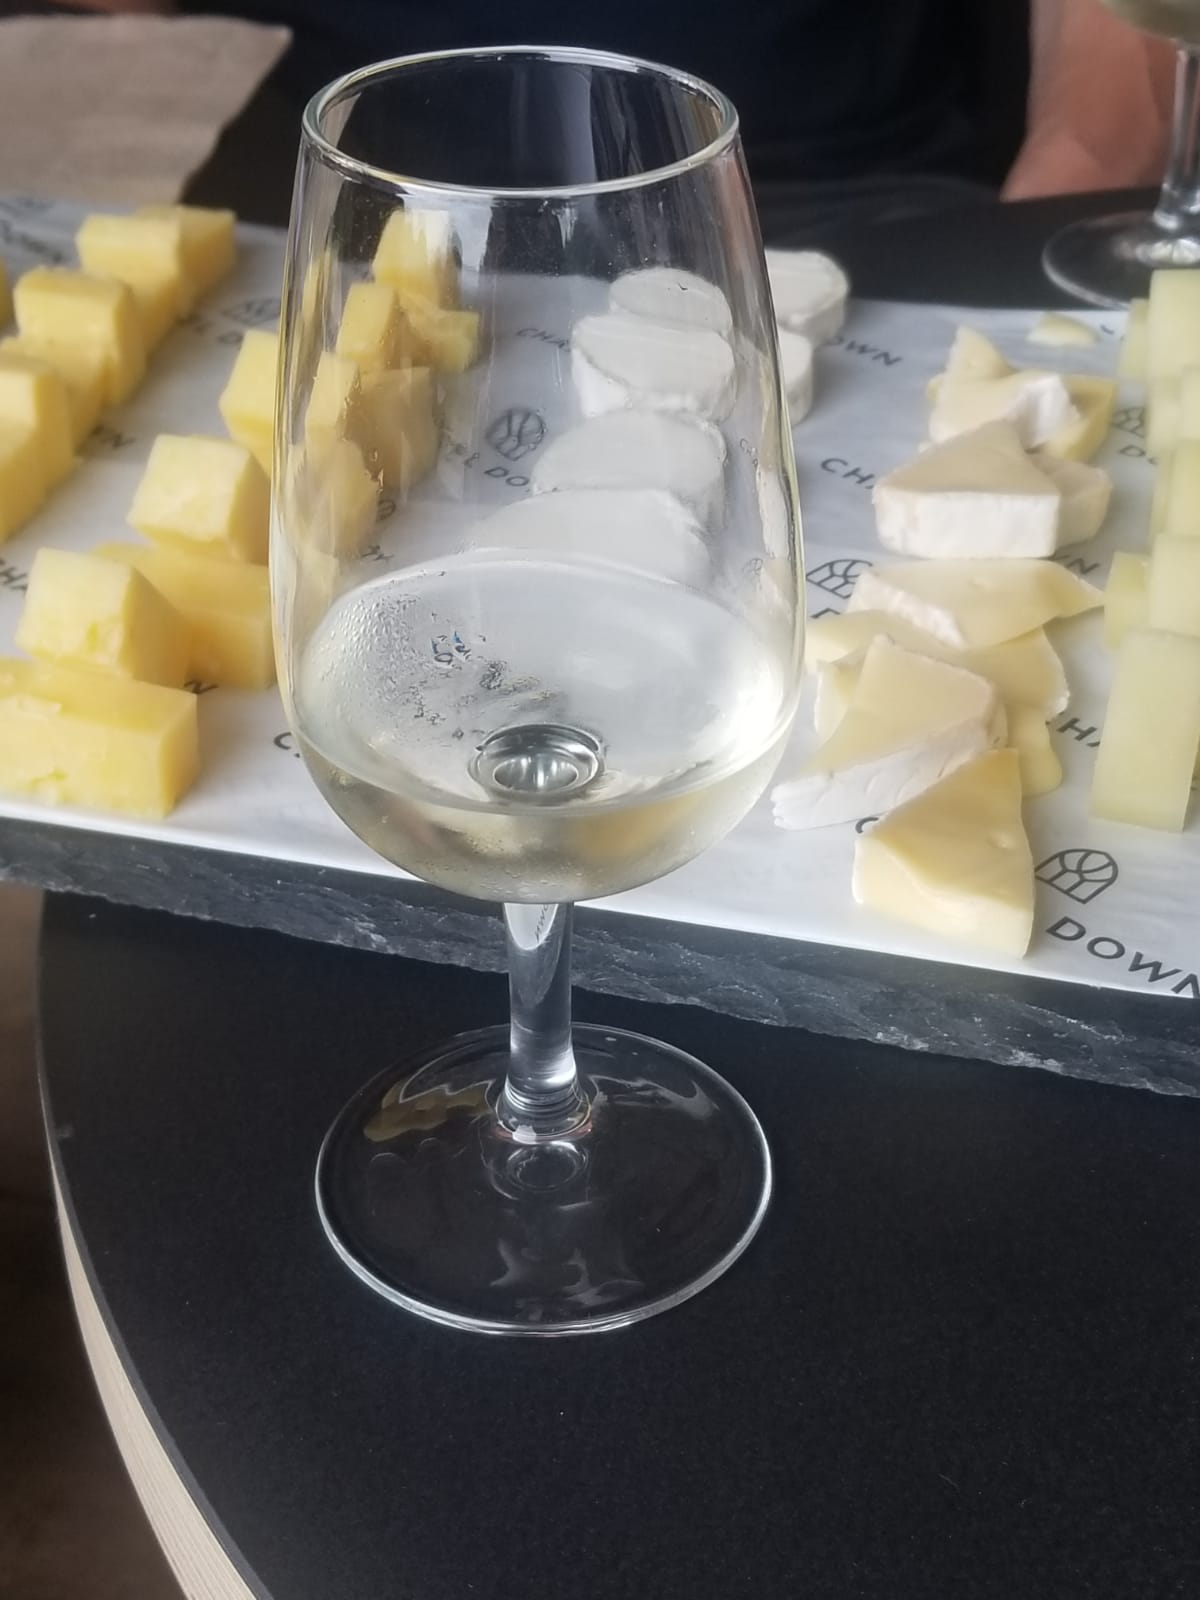 Cheese and wine. What's not to like..